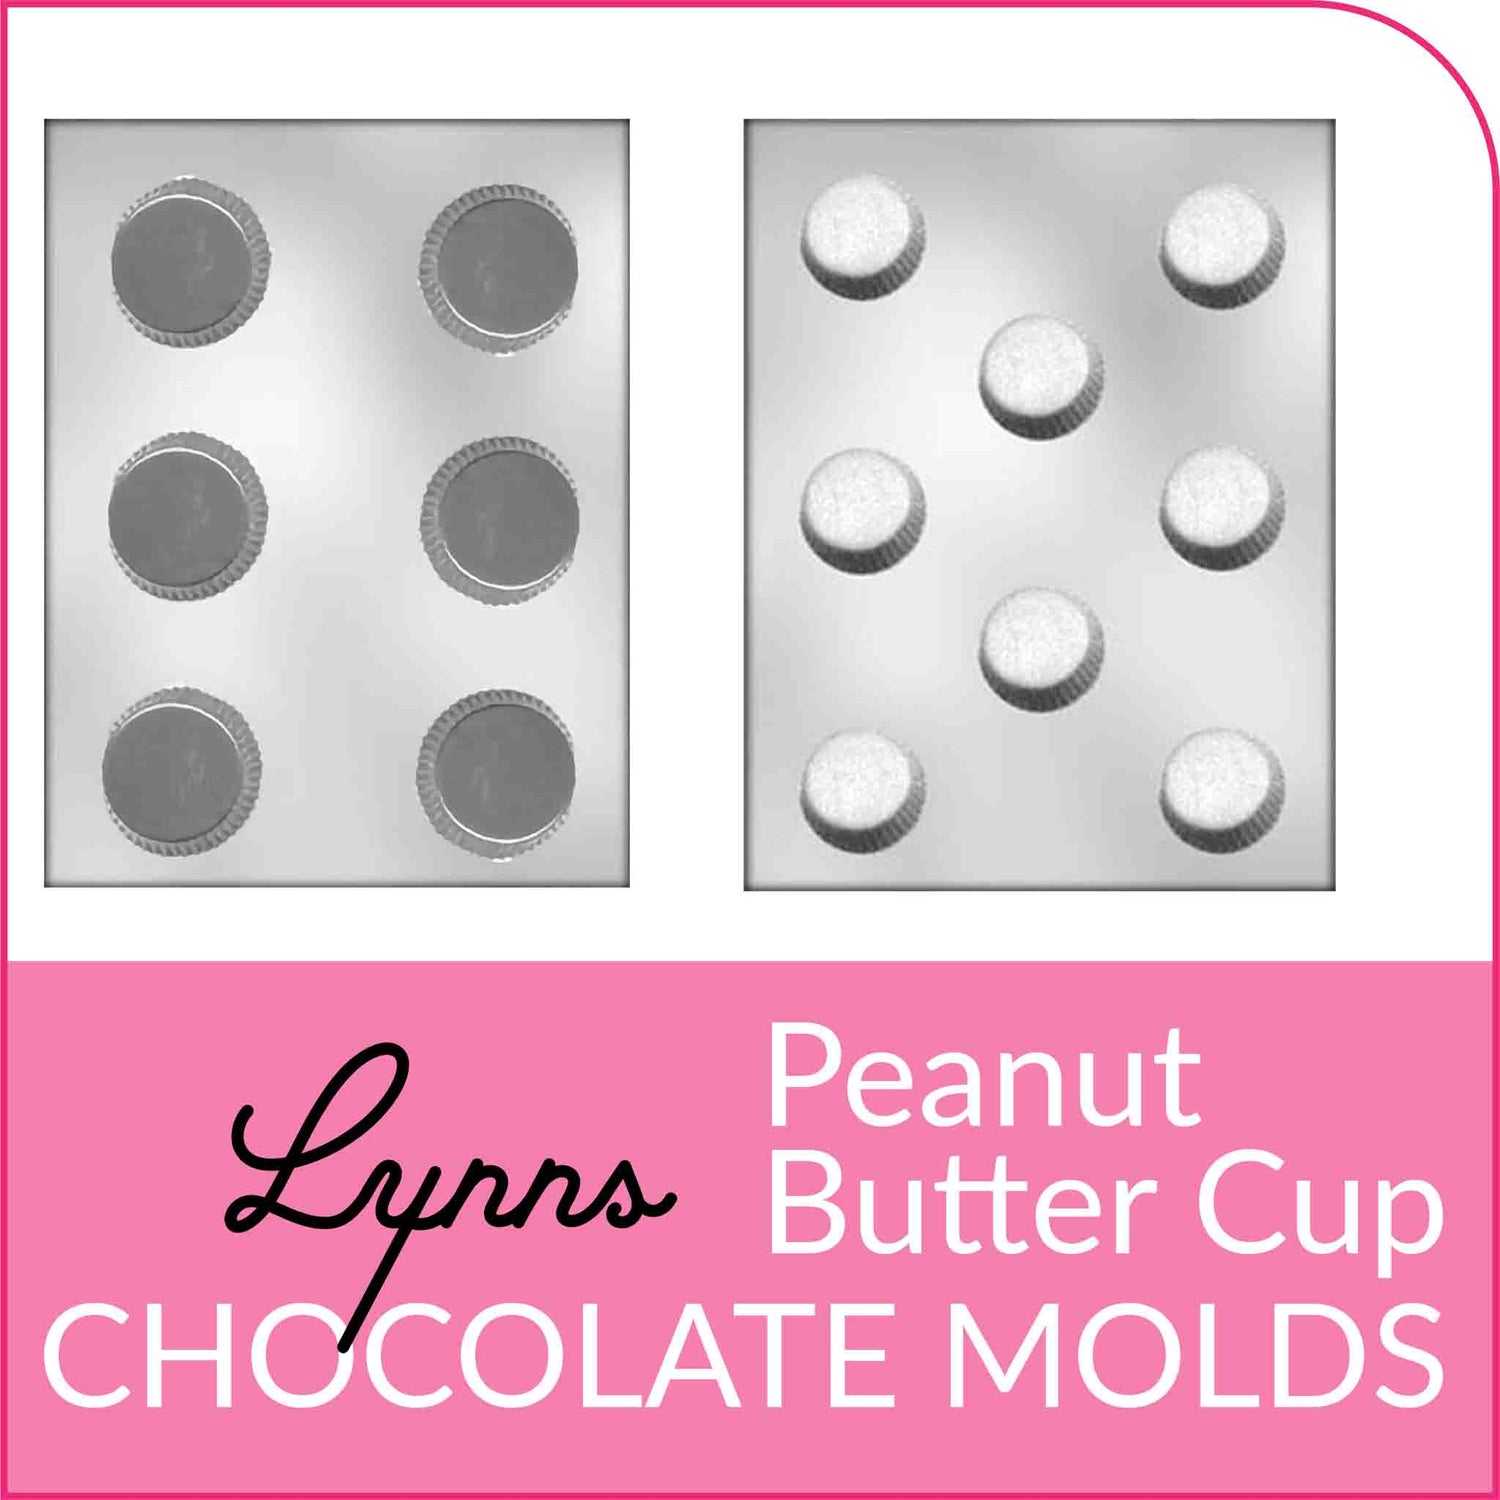 Shop Peanut Butter Cup Chocolate Molds from Lynn's